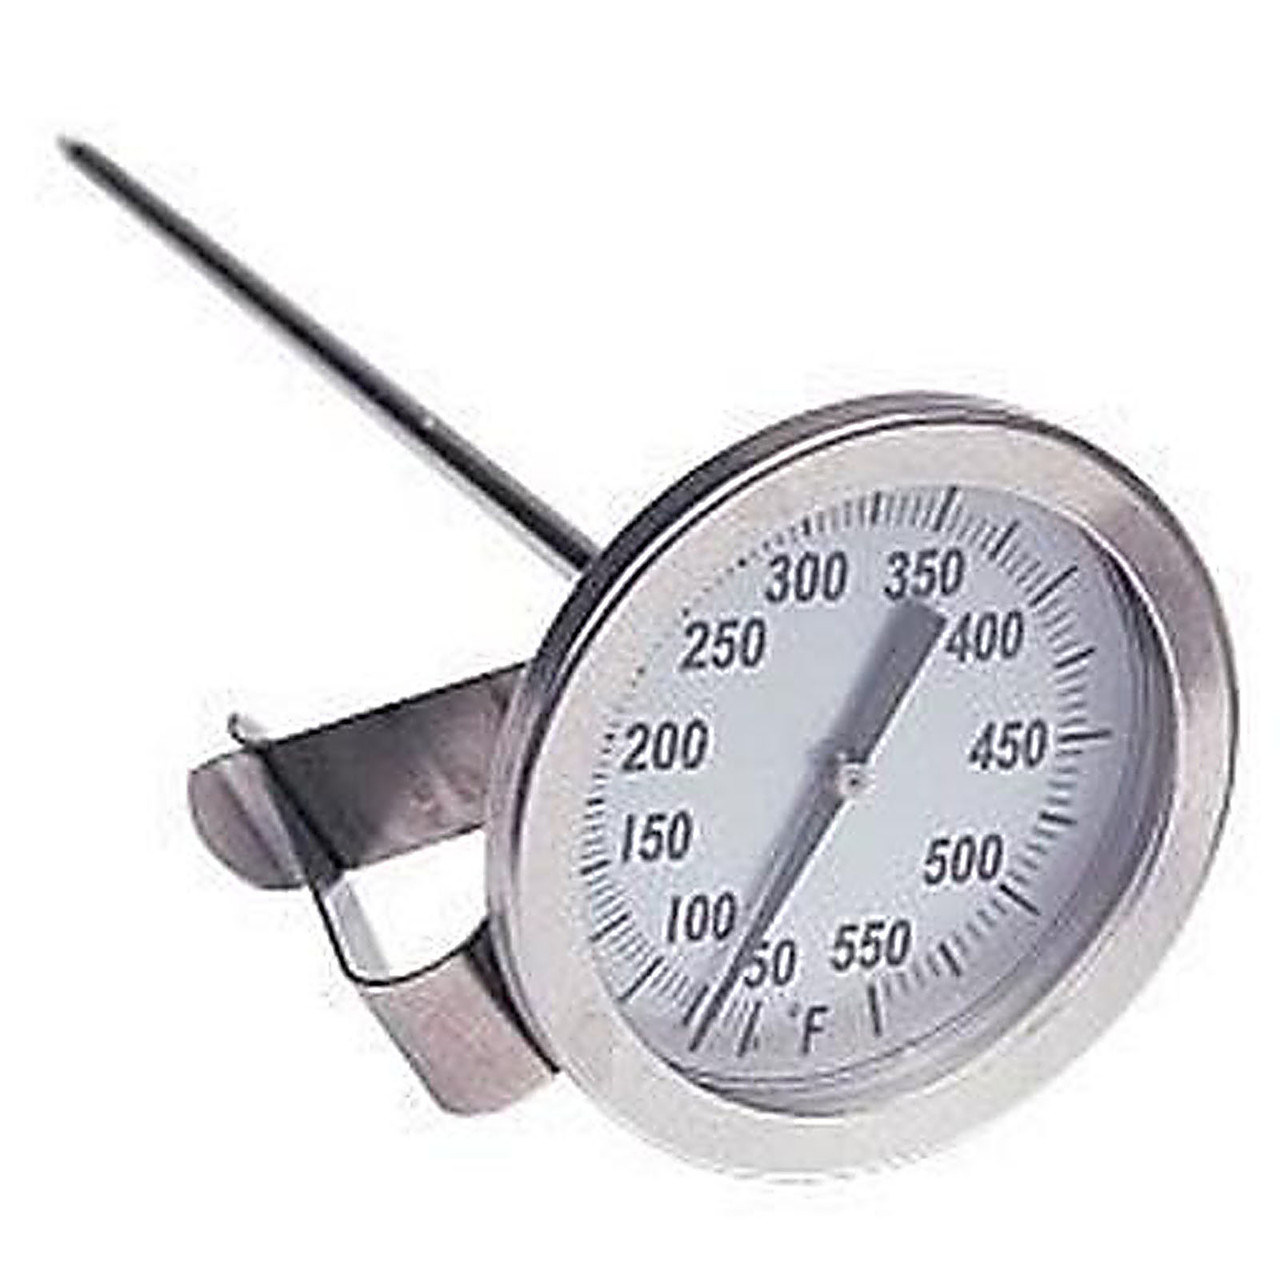 Camp Chef Infrared Cooking Thermometer